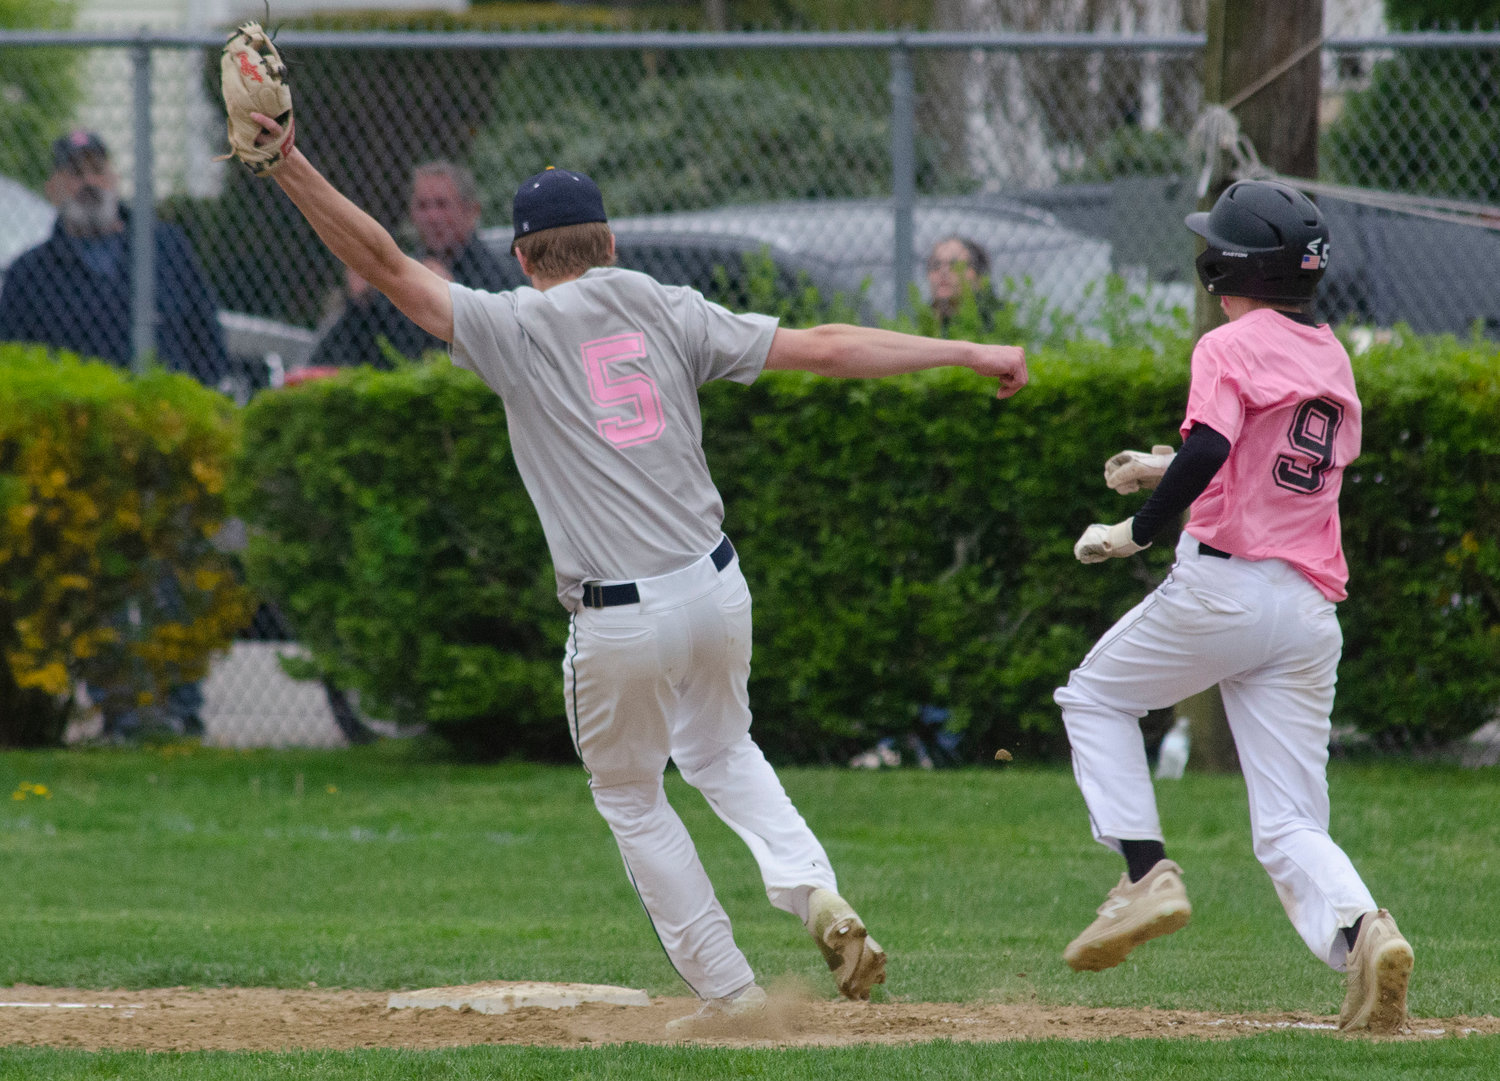 Barrington High School first baseman Nick Scandura beats Huskies second baseman Ethan Santerre to the bag for an out after taking a throw from a teammate. The two teams used the game as a fund-raiser for the Jimmy Fund, collecting more than $5,000 in donations.